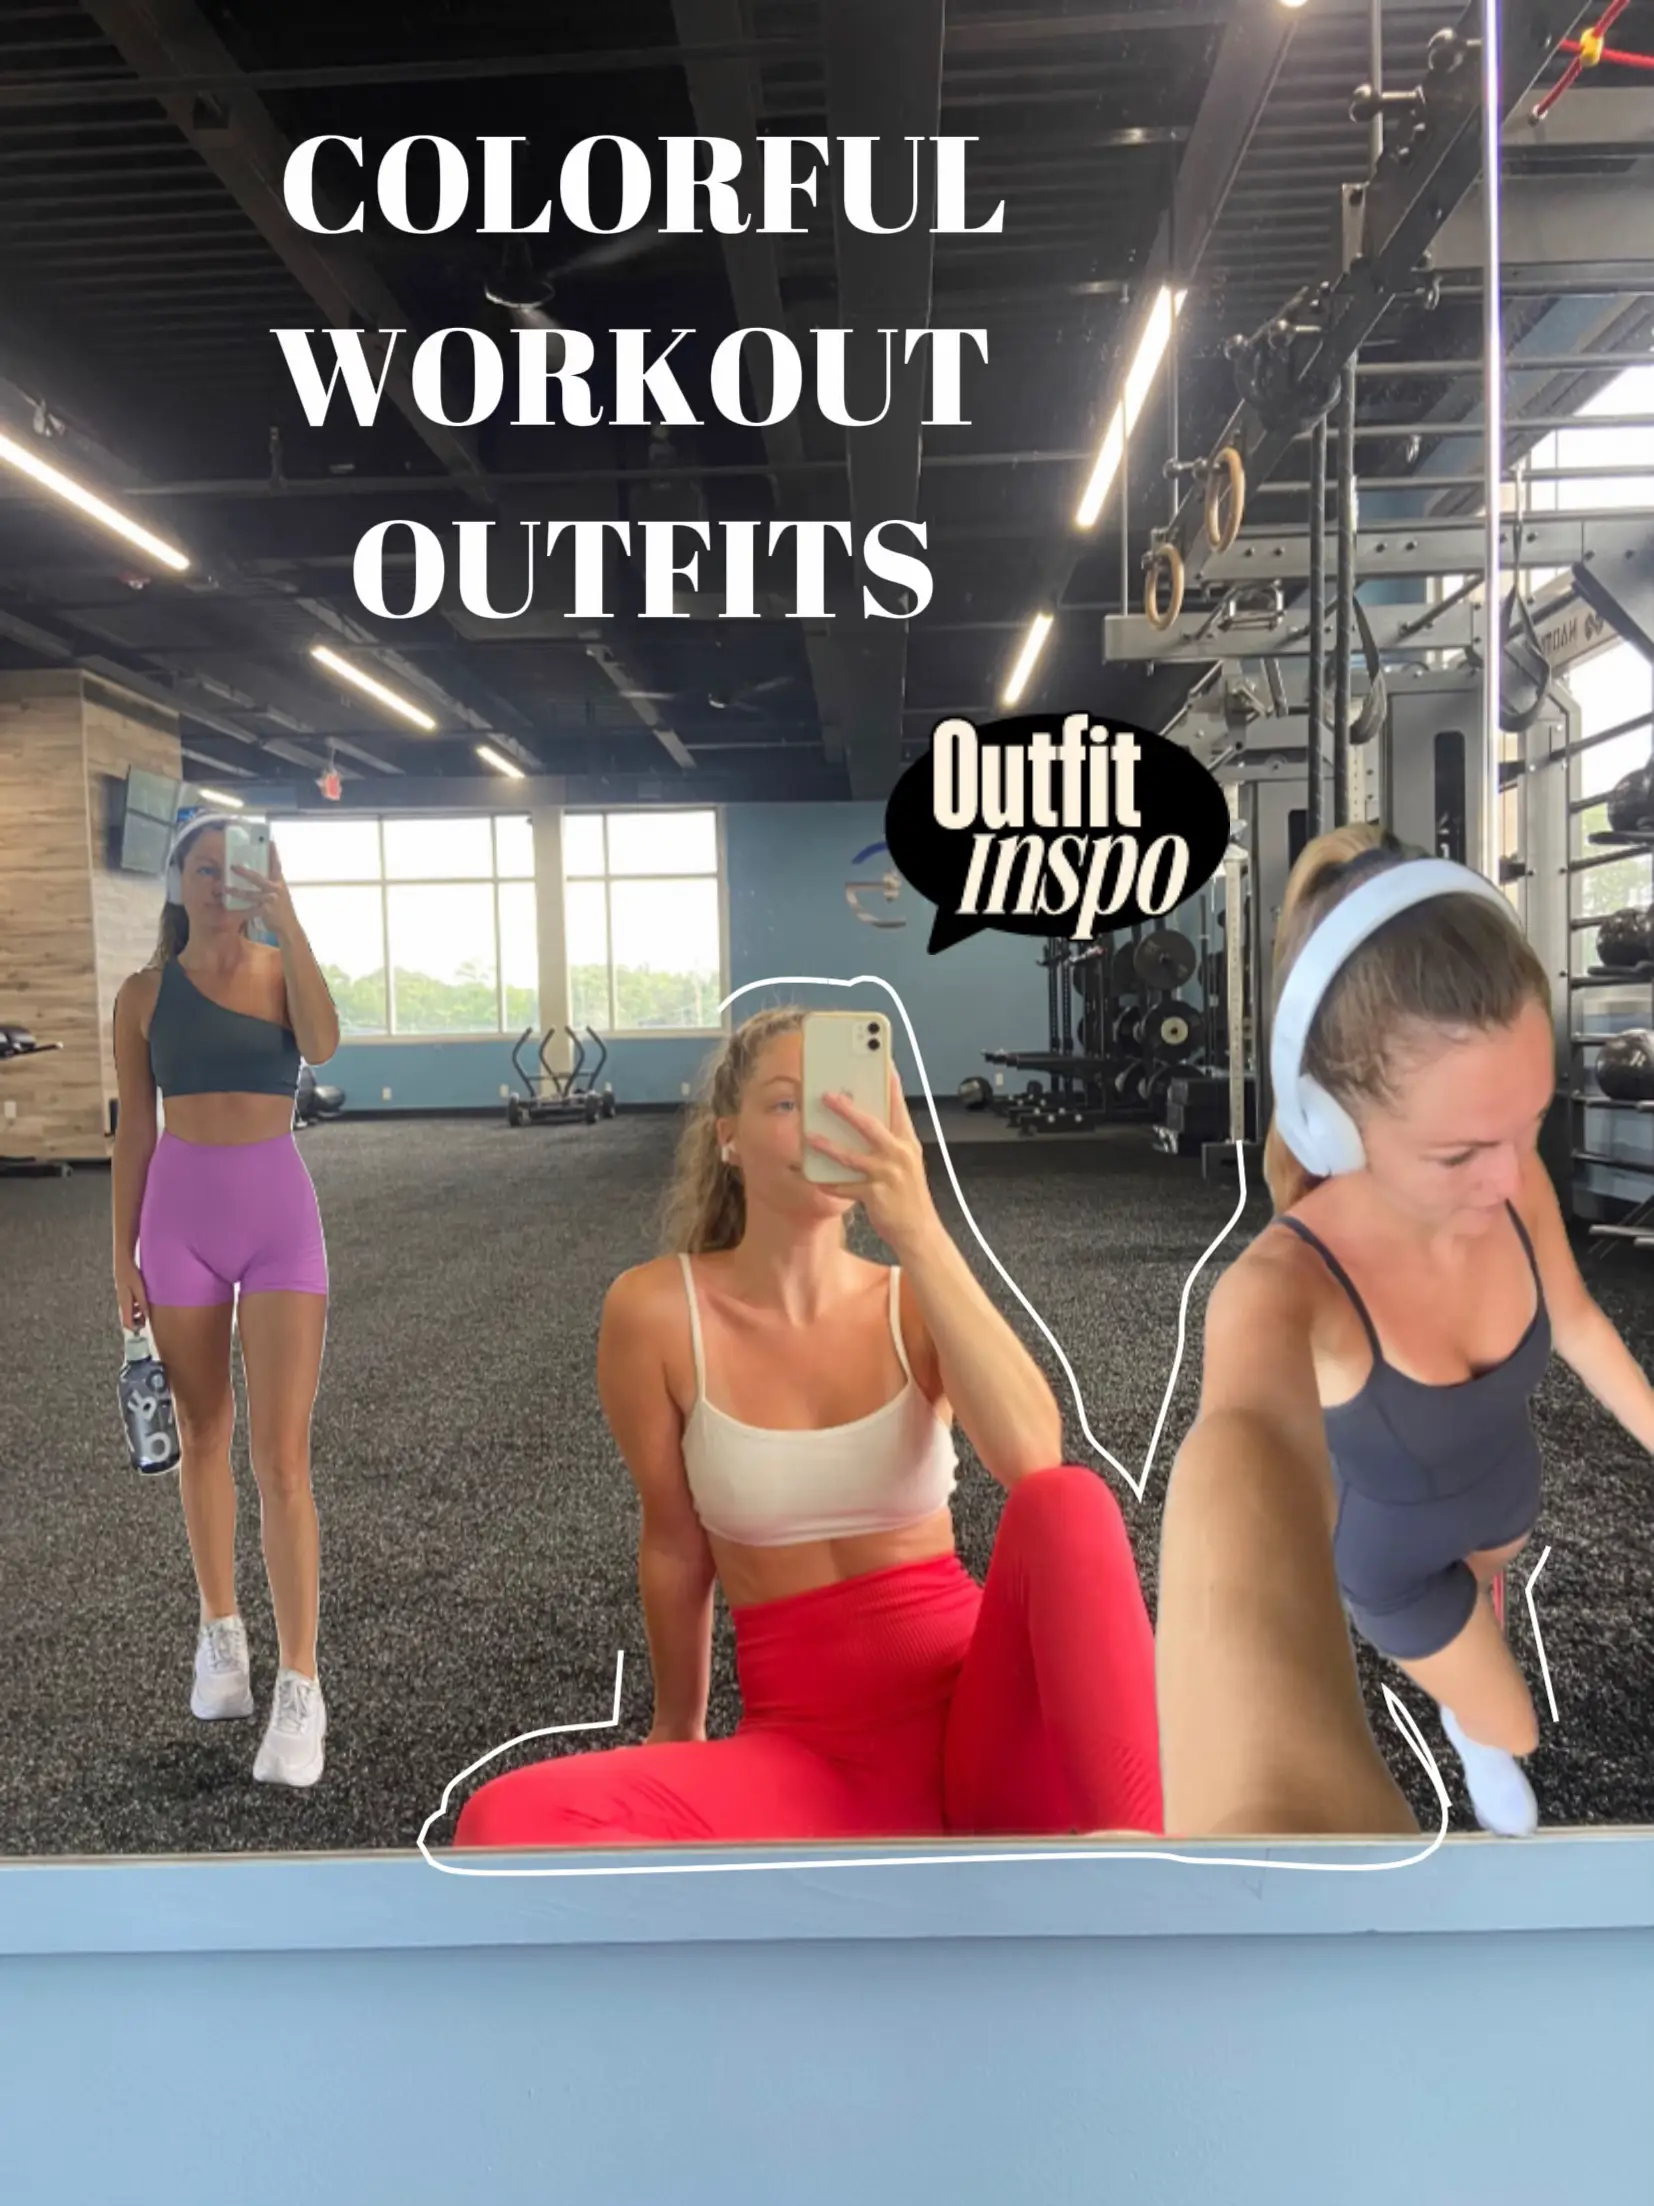 Colorful Workout Outfits, Gallery posted by Kaylie